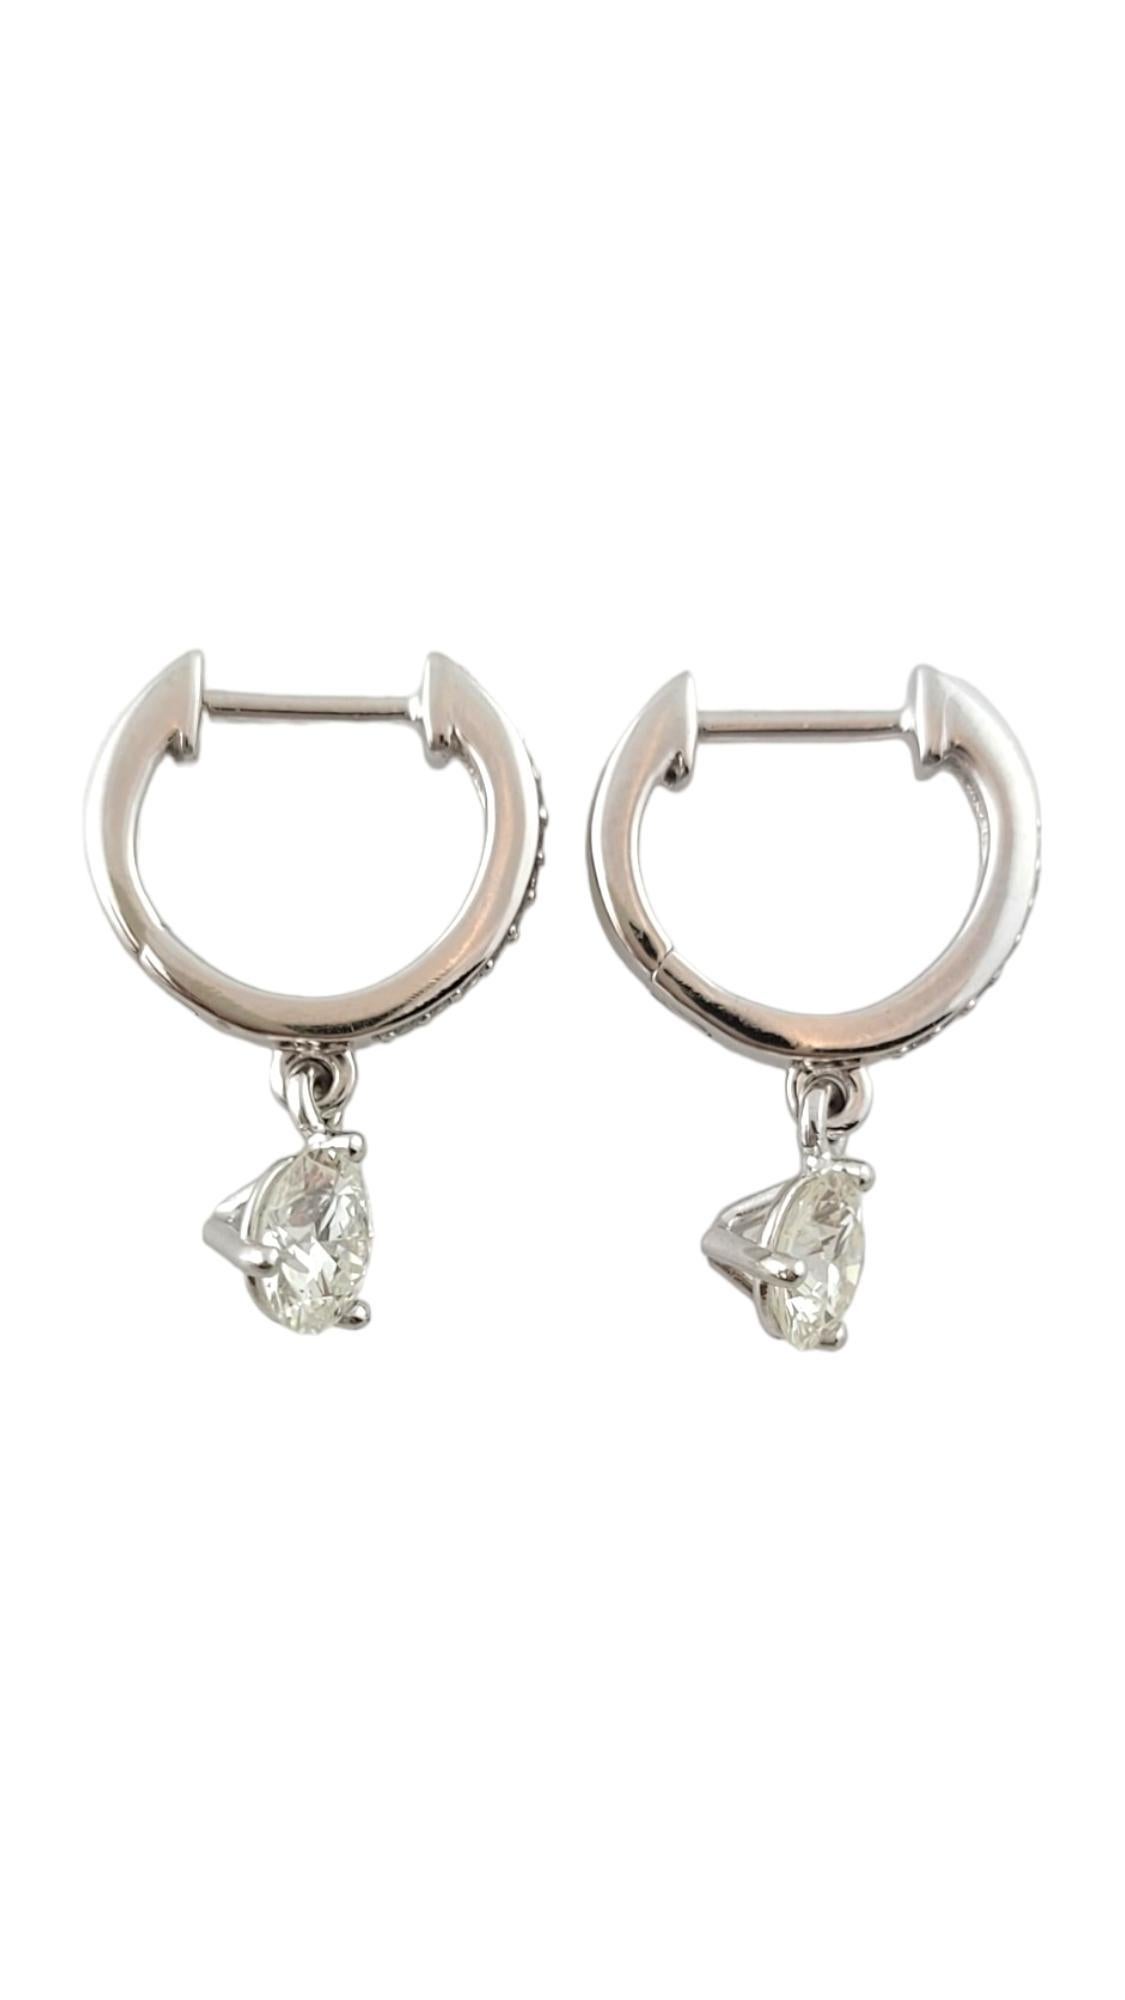 This sparkling hoop earrings each features 12 round brilliant cut diamond set in classic 14K white gold.

Approximate total diamond weight:  1.02 ct.

Diamond color: G-H

Diamond clarity: VS-SI

Size:  13 mm

Weight: 1.6 wt. /  2.5 gr.

Stamped: